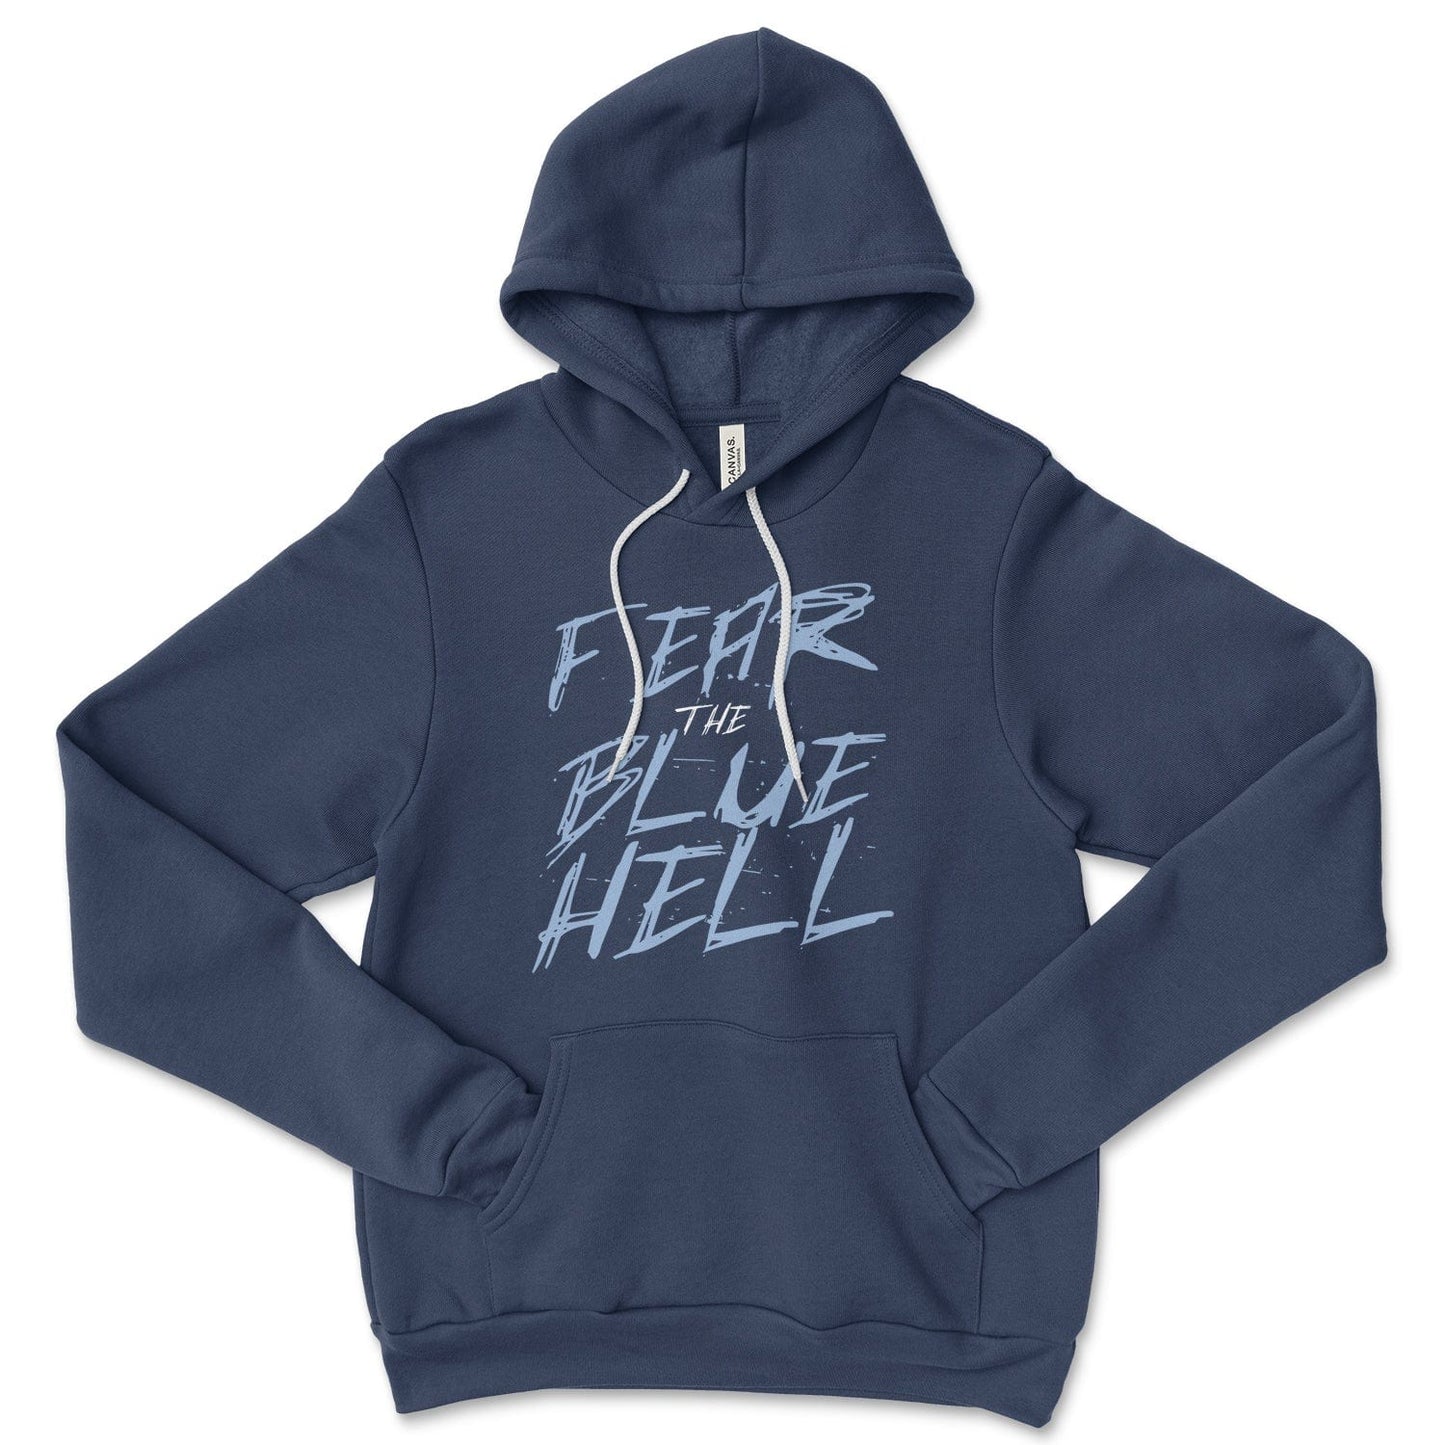 KC Swag Sporting Kansas City powder blue/white FEAR THE BLUE HELL on navy fleece pull-over hoodie